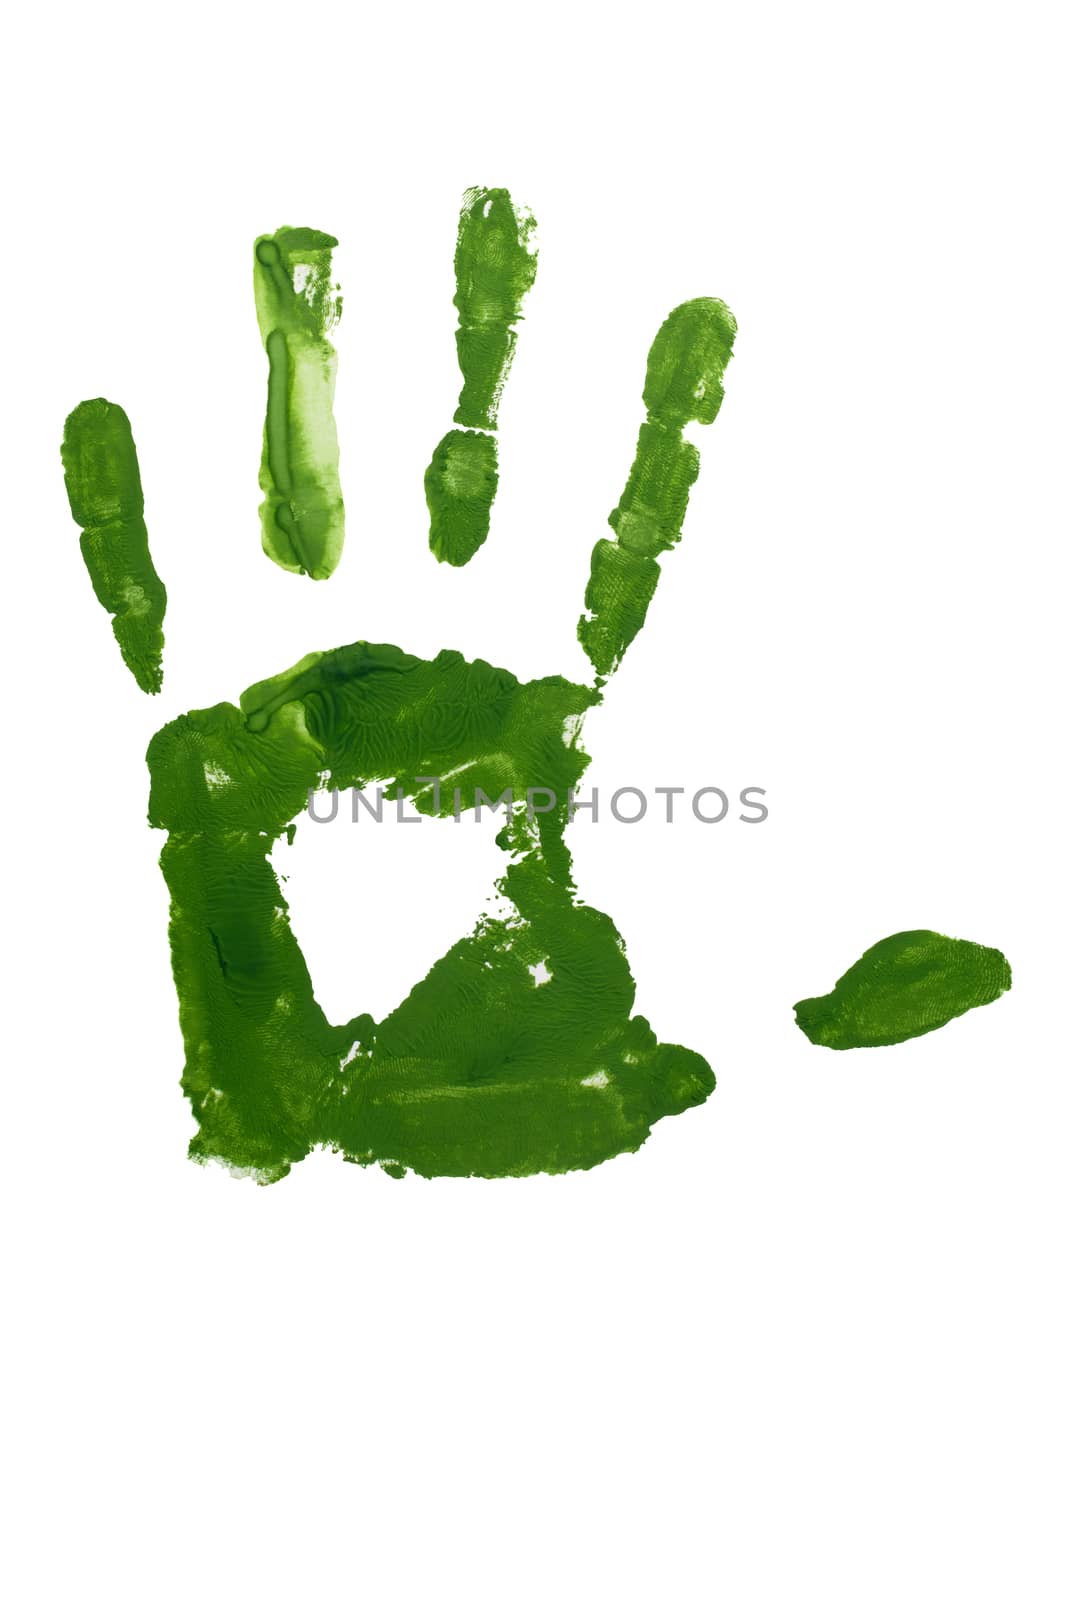 Prints Hand Green Isolated on White Background